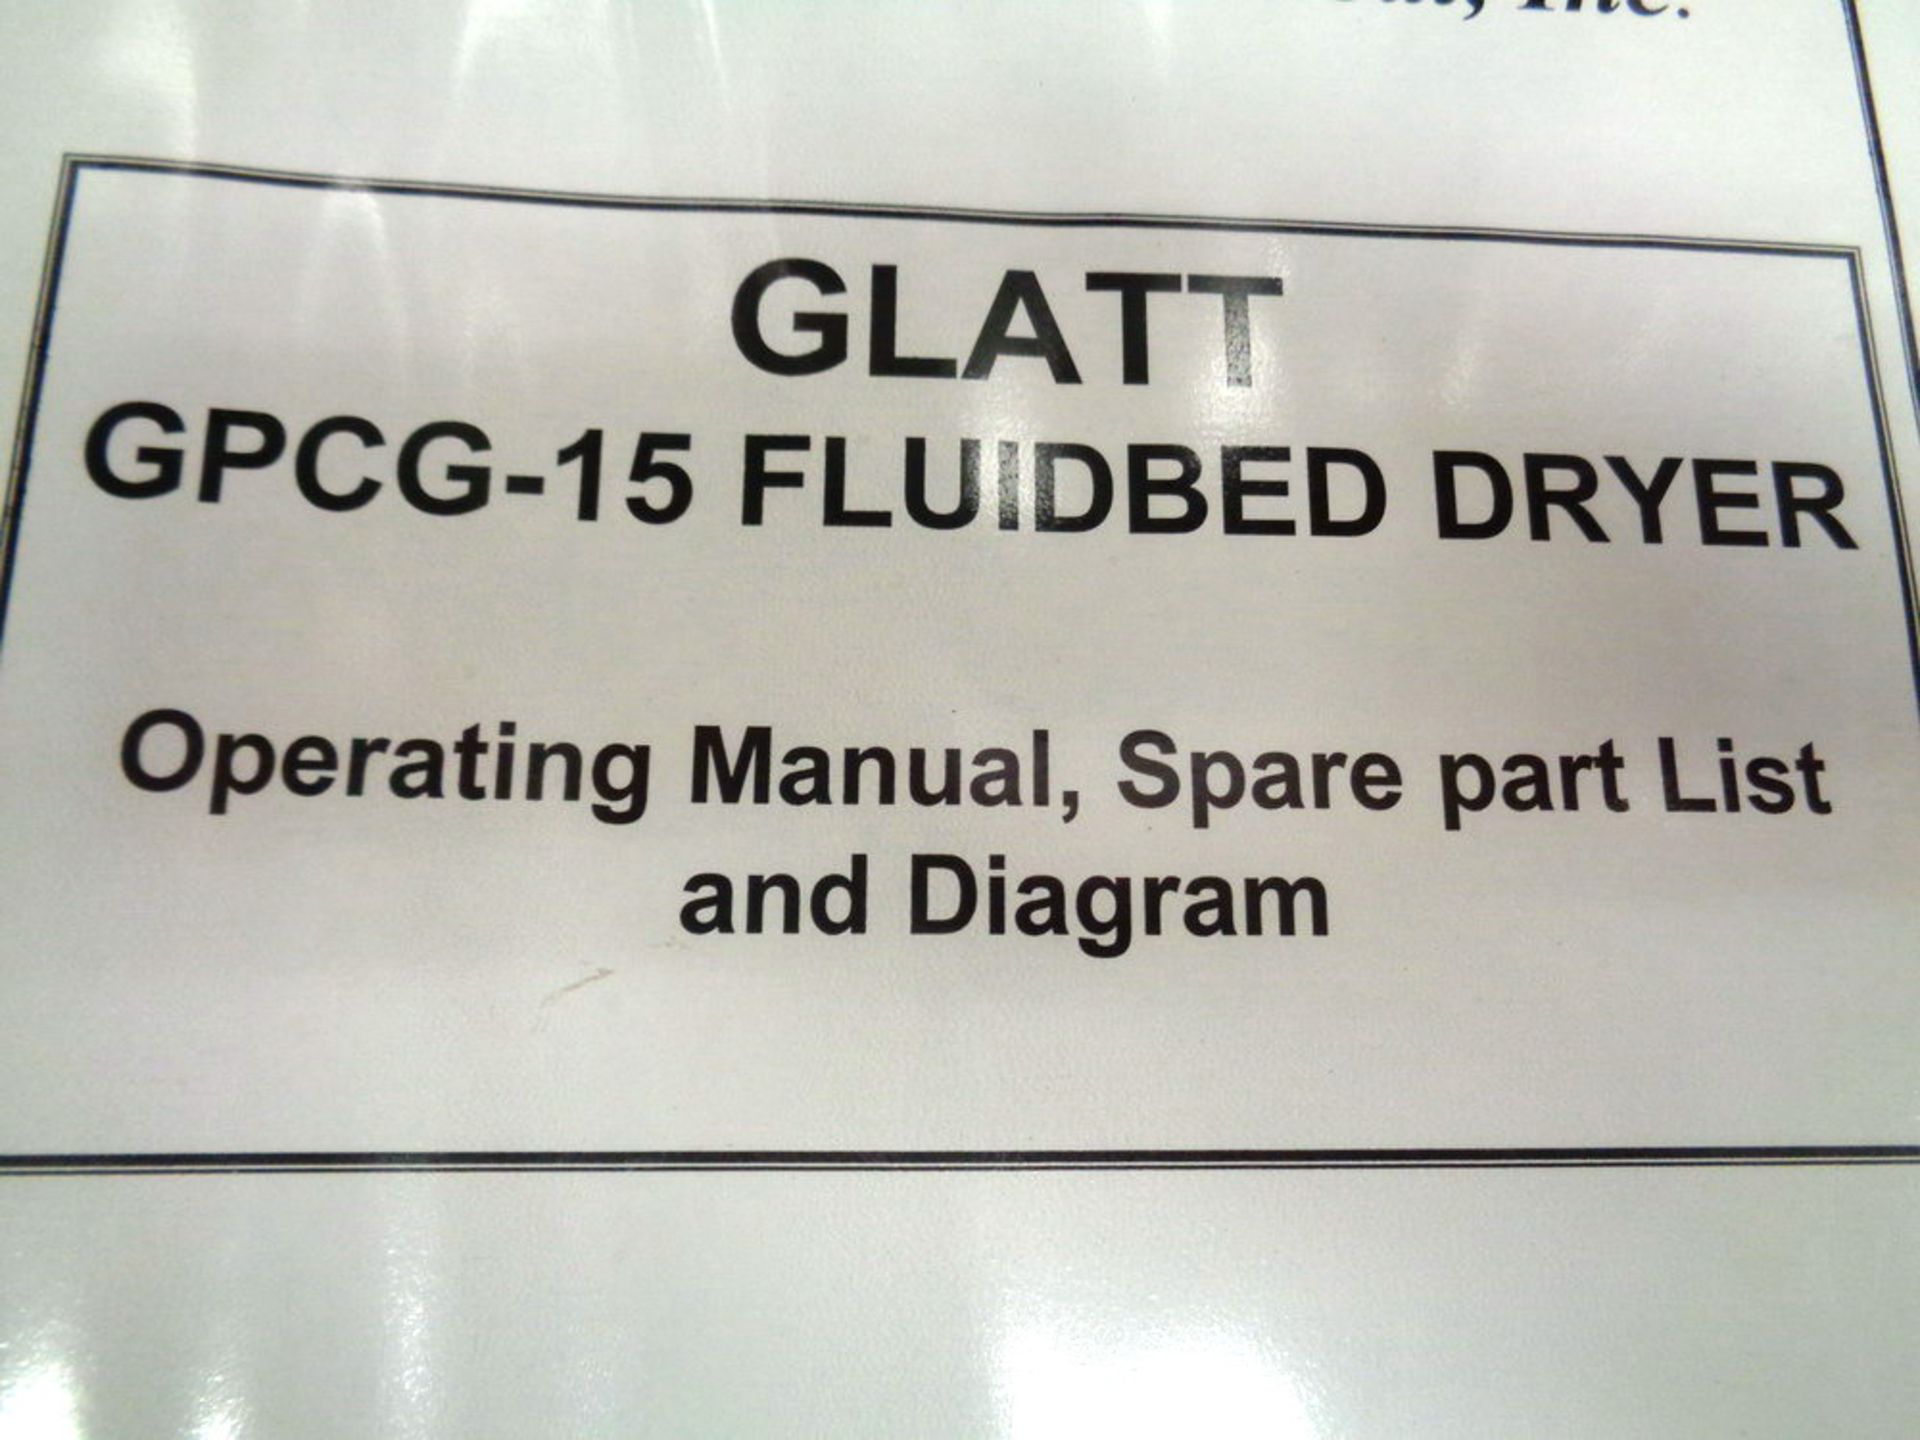 Glatt Fluid Bed Granulator with 9" Wurster, 22L and 45L Drying Inserts, Model GPCG-15, SN 5313. - Image 23 of 25